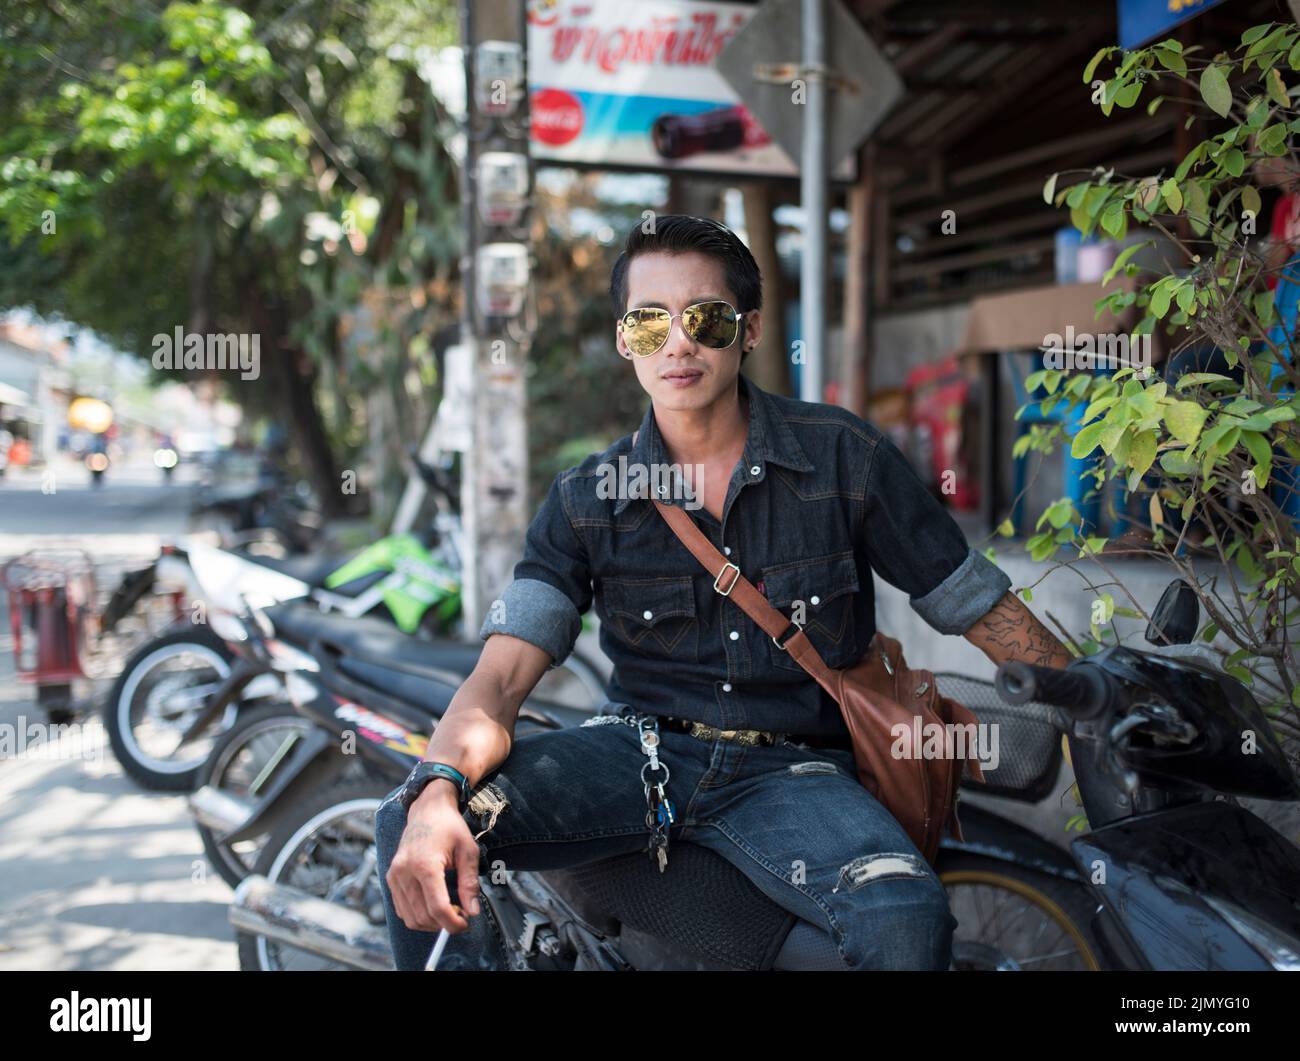 Portrait of a shop worker who rents a motorcycle. Stock Photo